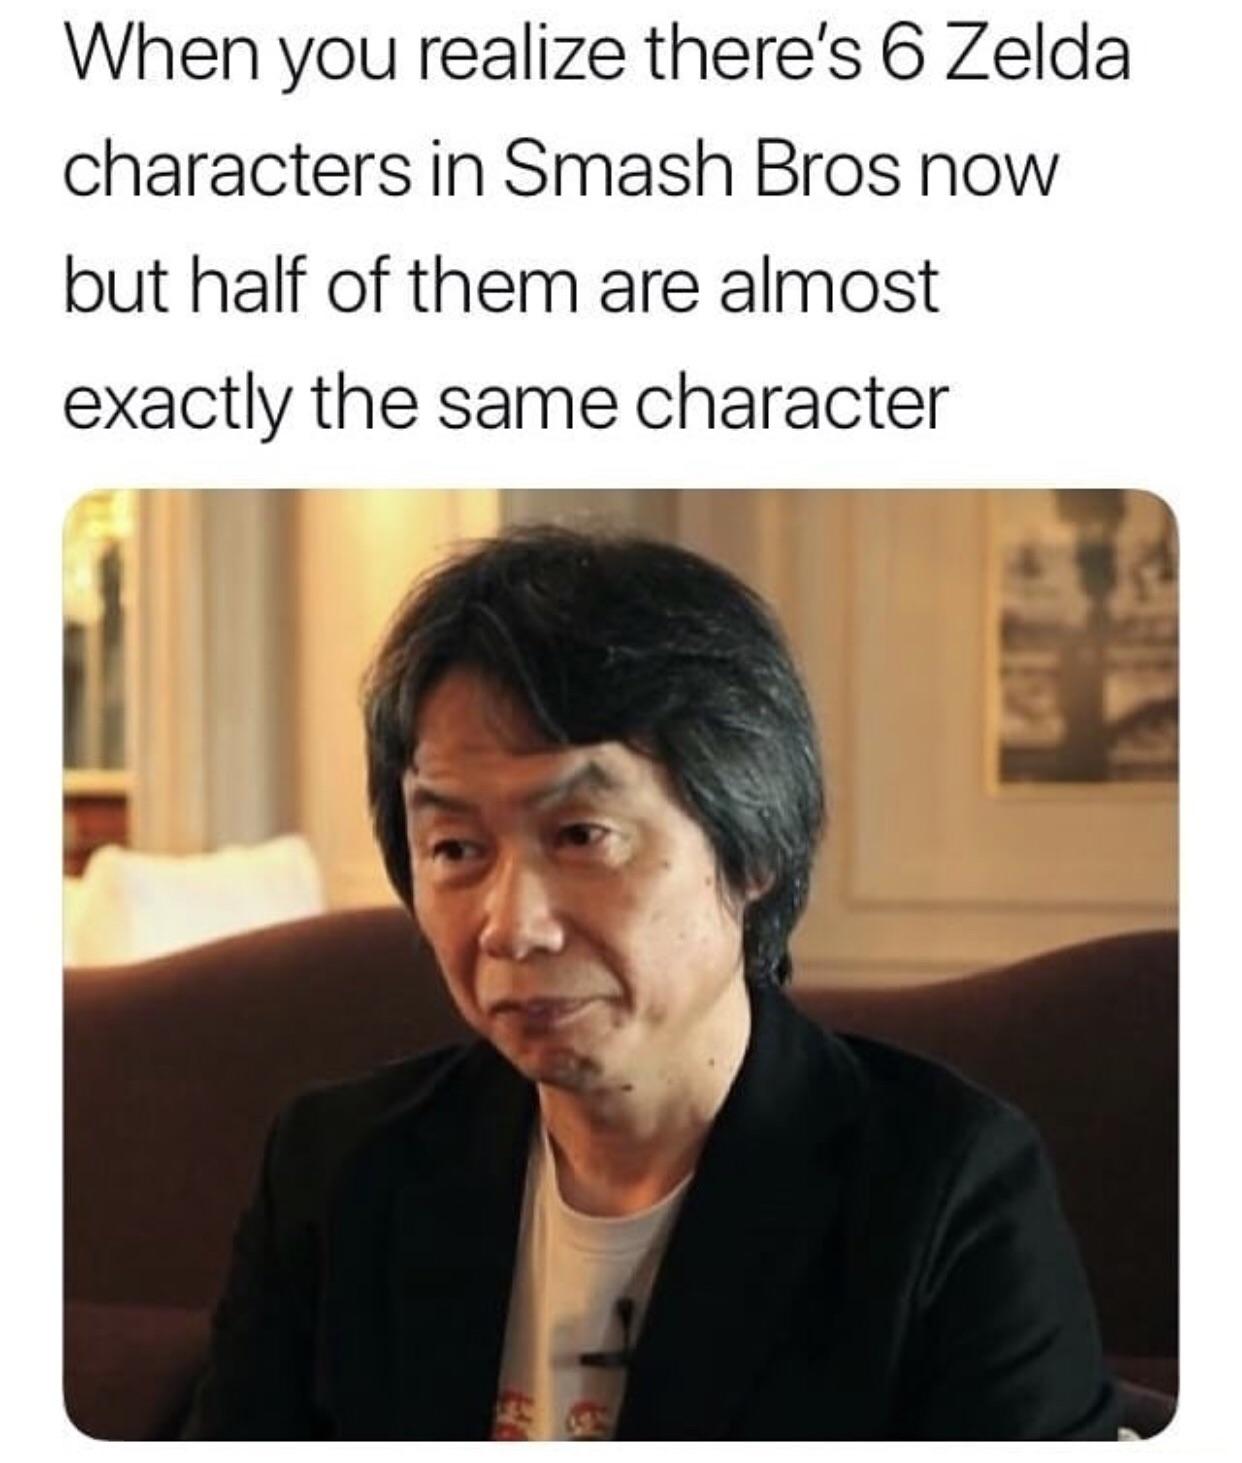 sad shigeru miyamoto - When you realize there's 6 Zelda characters in Smash Bros now but half of them are almost exactly the same character